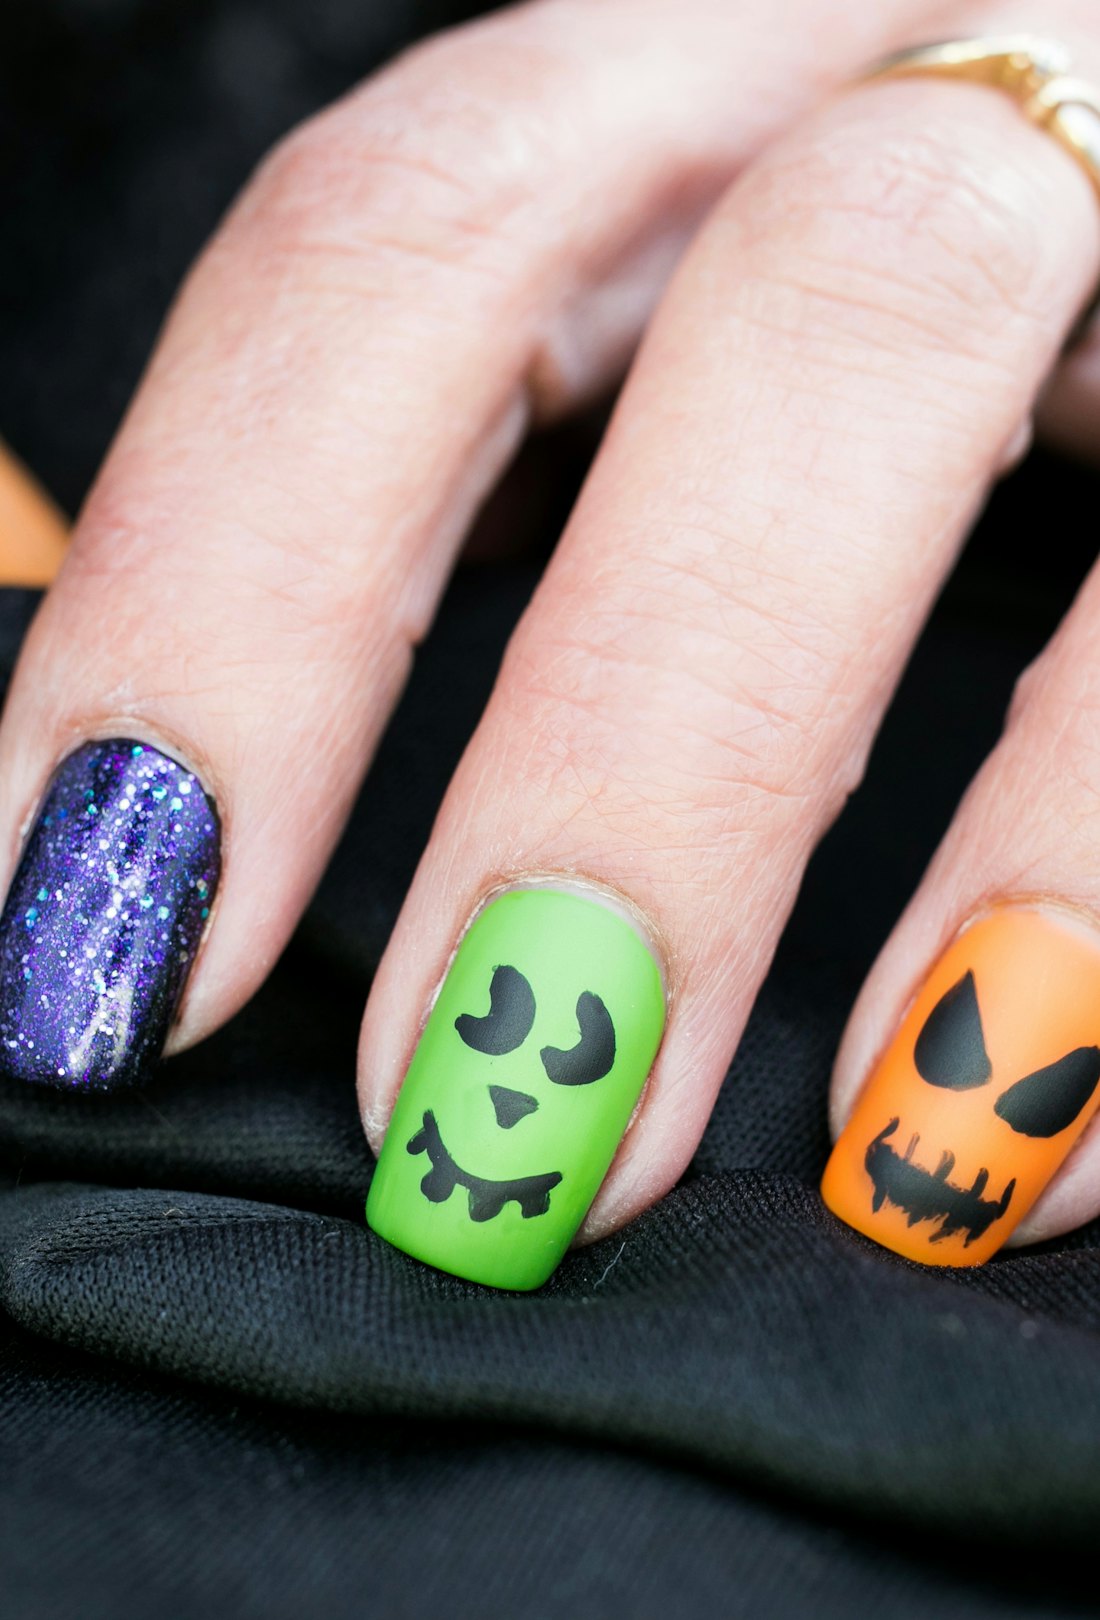 Halloween nails with monsters and jack-o'-lanterns.